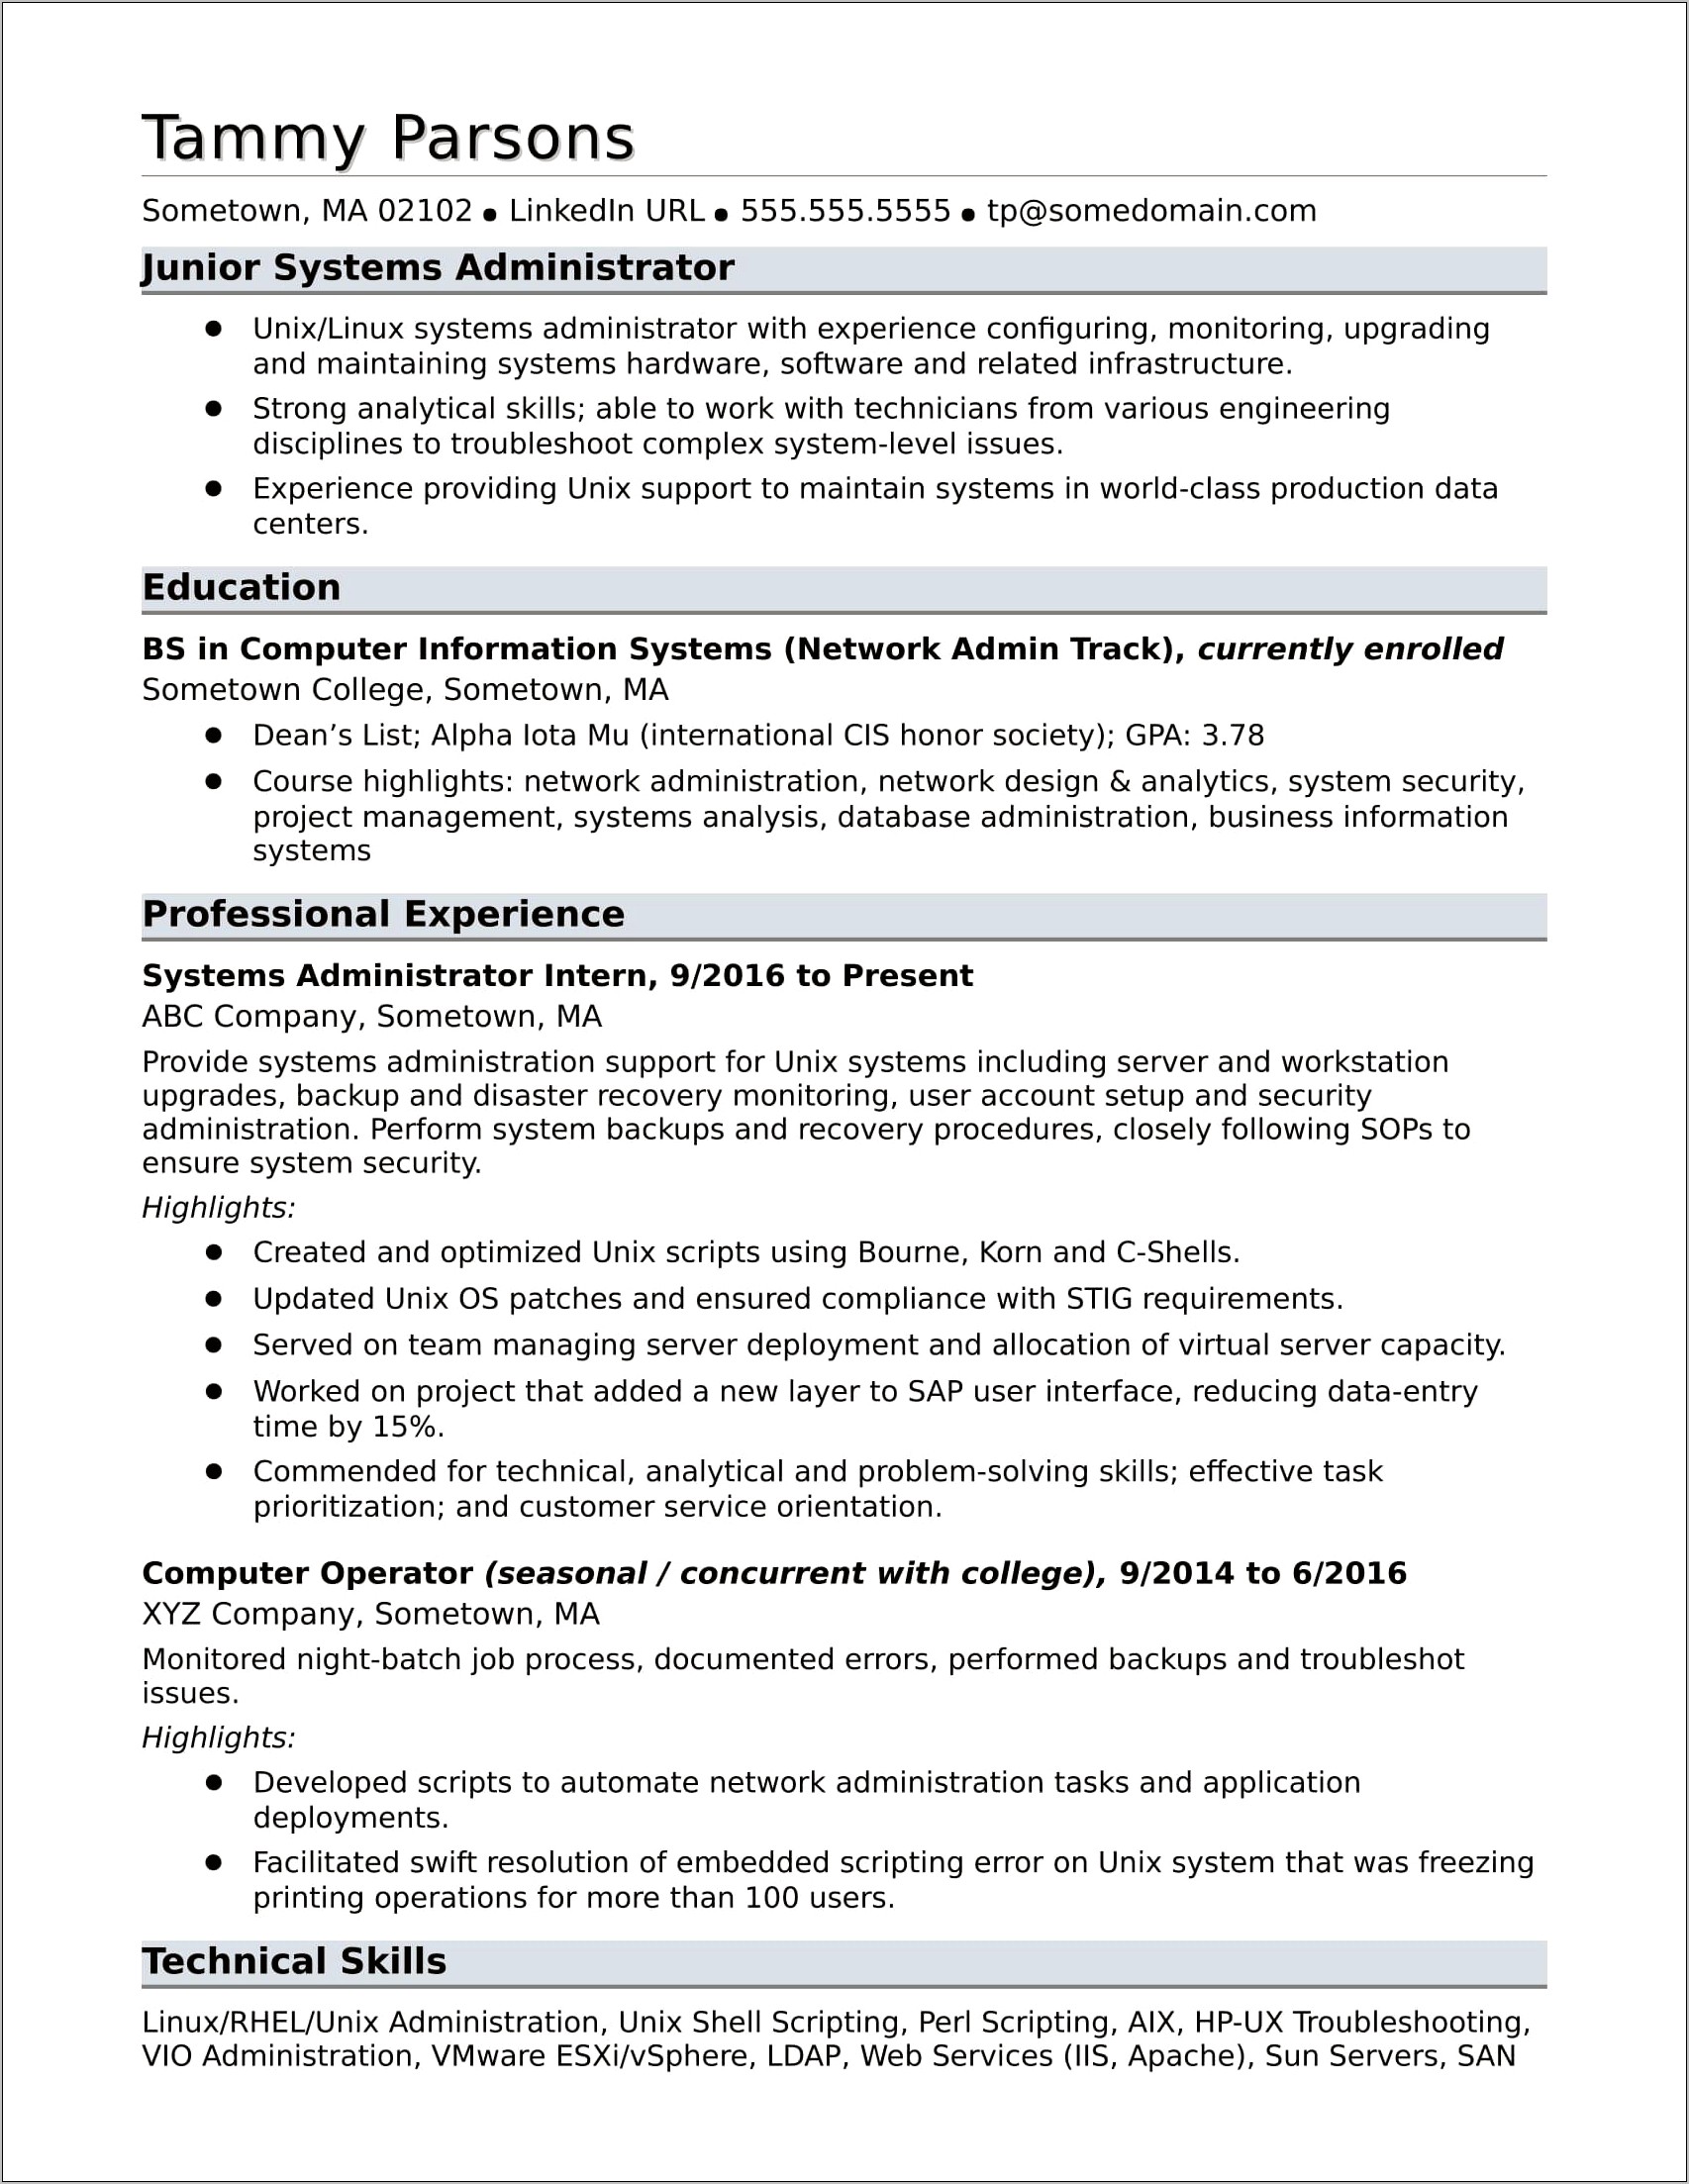 Strong Analytical Skills On Resume